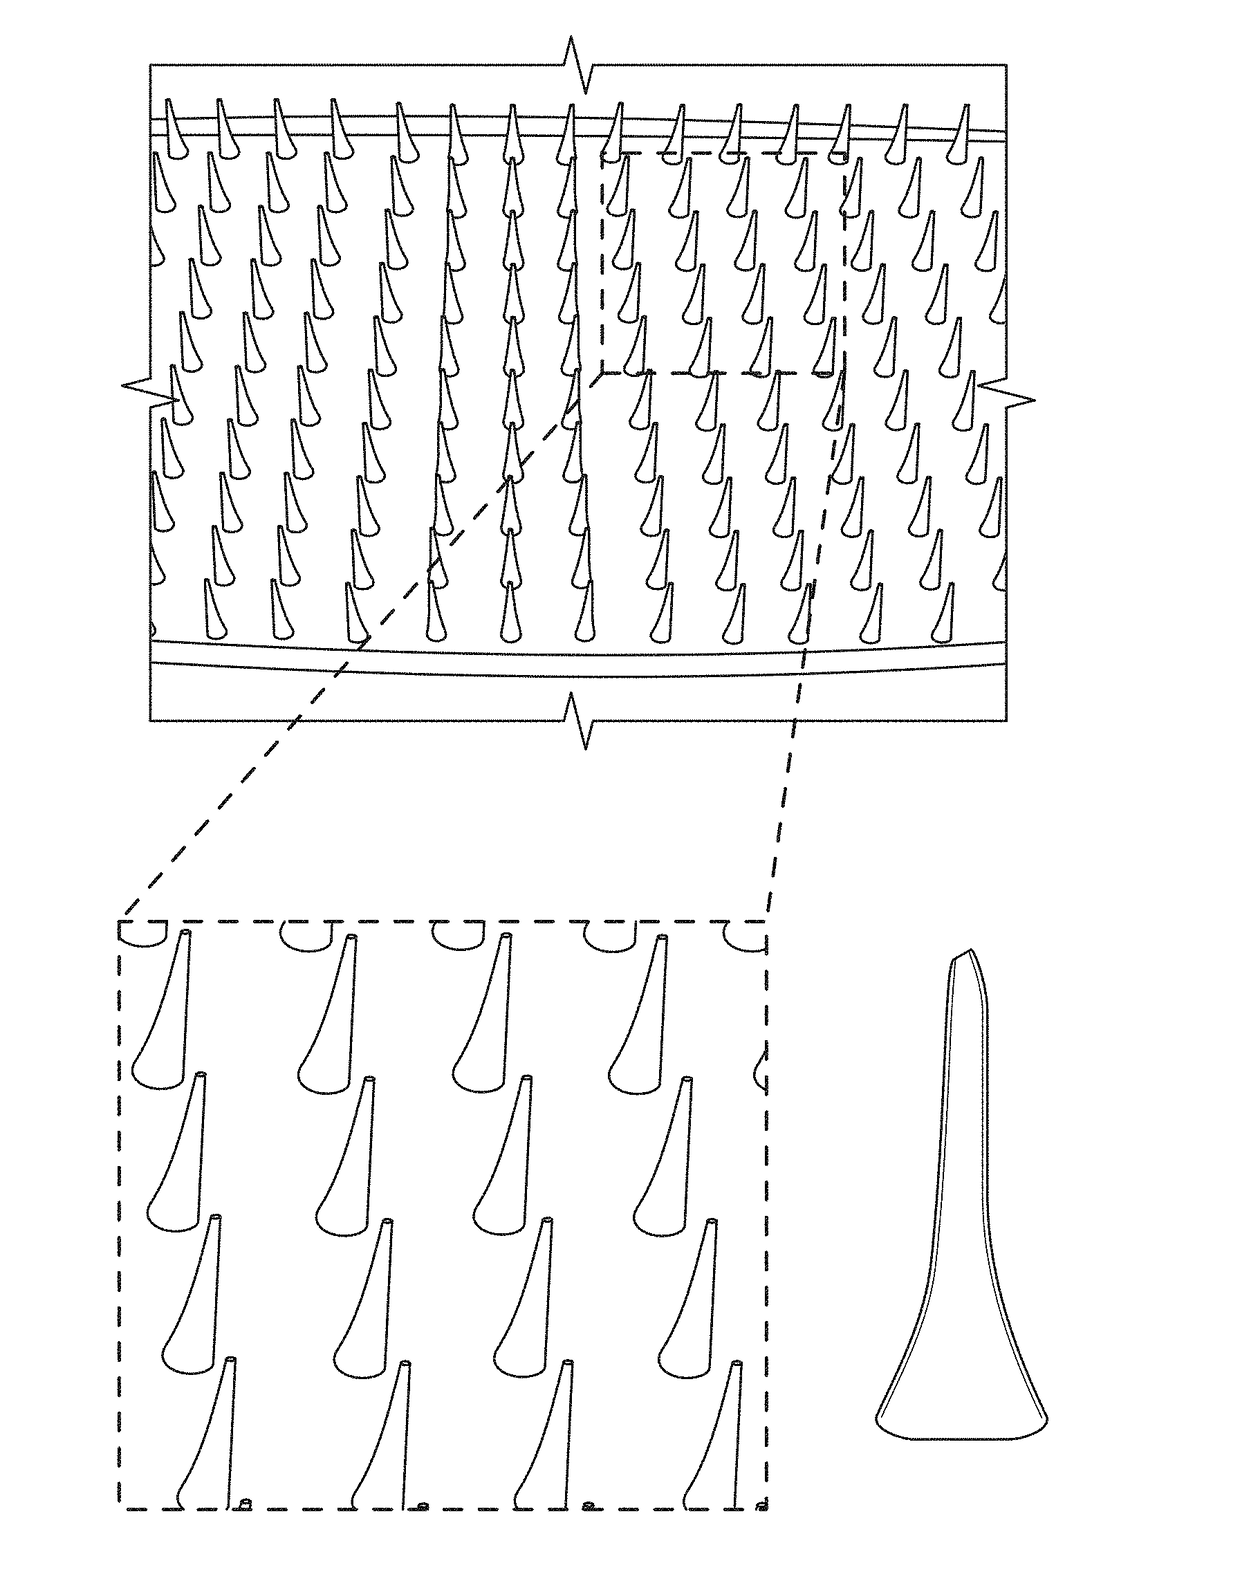 Microneedle compositions and methods of using same